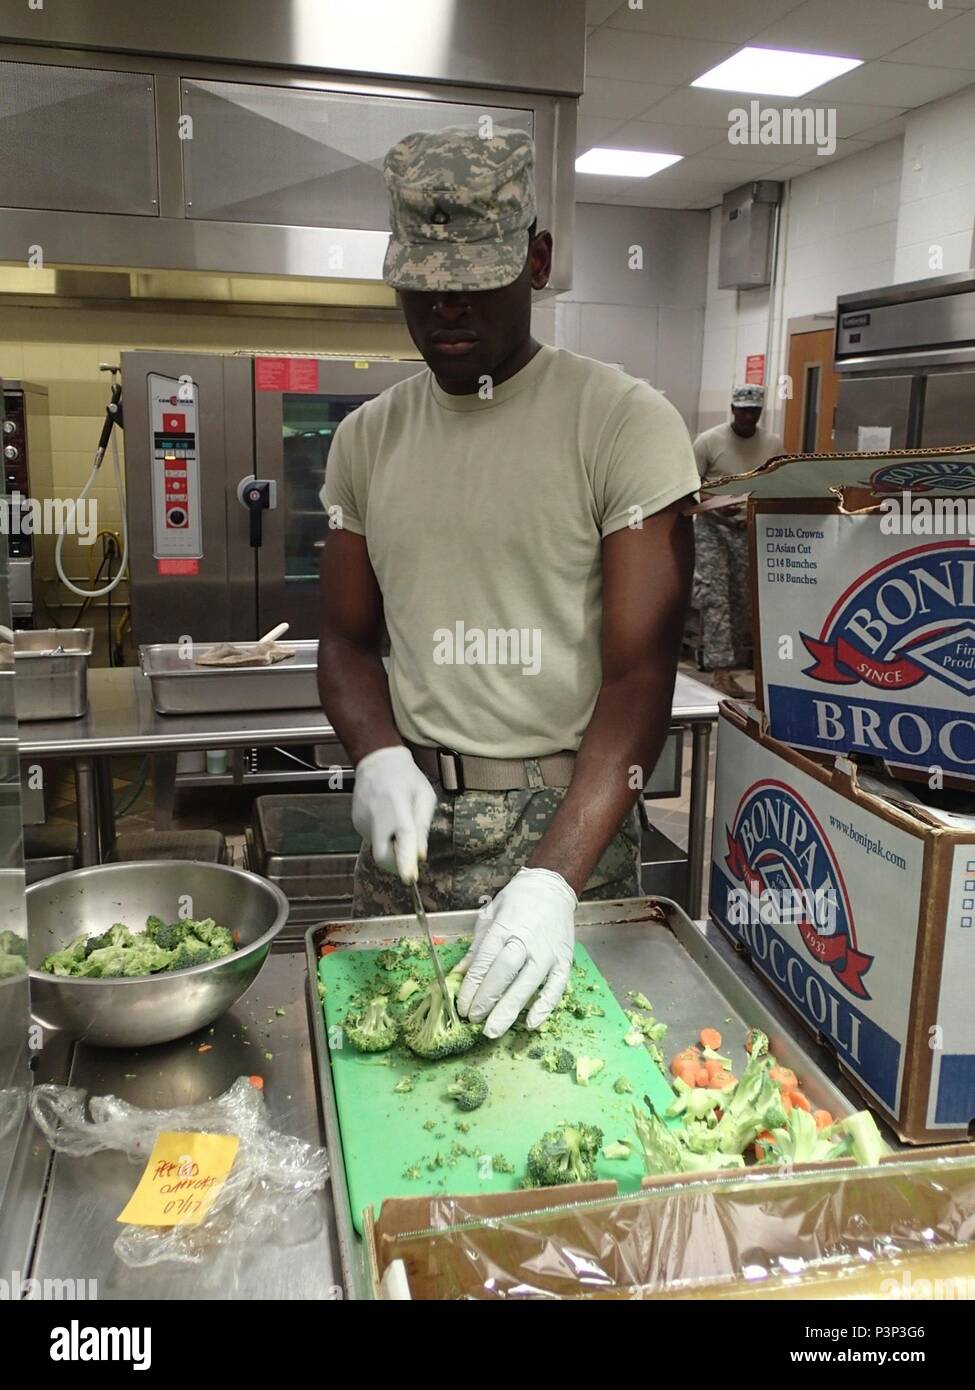 Pfc. Ontarius Hicks, a nutrition care specialist from Company A, 48th Combat Support Hospital out of Fort Story, Va., prepares dinner for other service members during Greater Chenango Cares, July 22, 2016.  Greater Chenango Cares is one of the Innovative Readiness Training events which provides real-world training in a joint civil-military environment while delivering world-class medical care to the people of Chenango County, N.Y., from July 15-24. Stock Photo